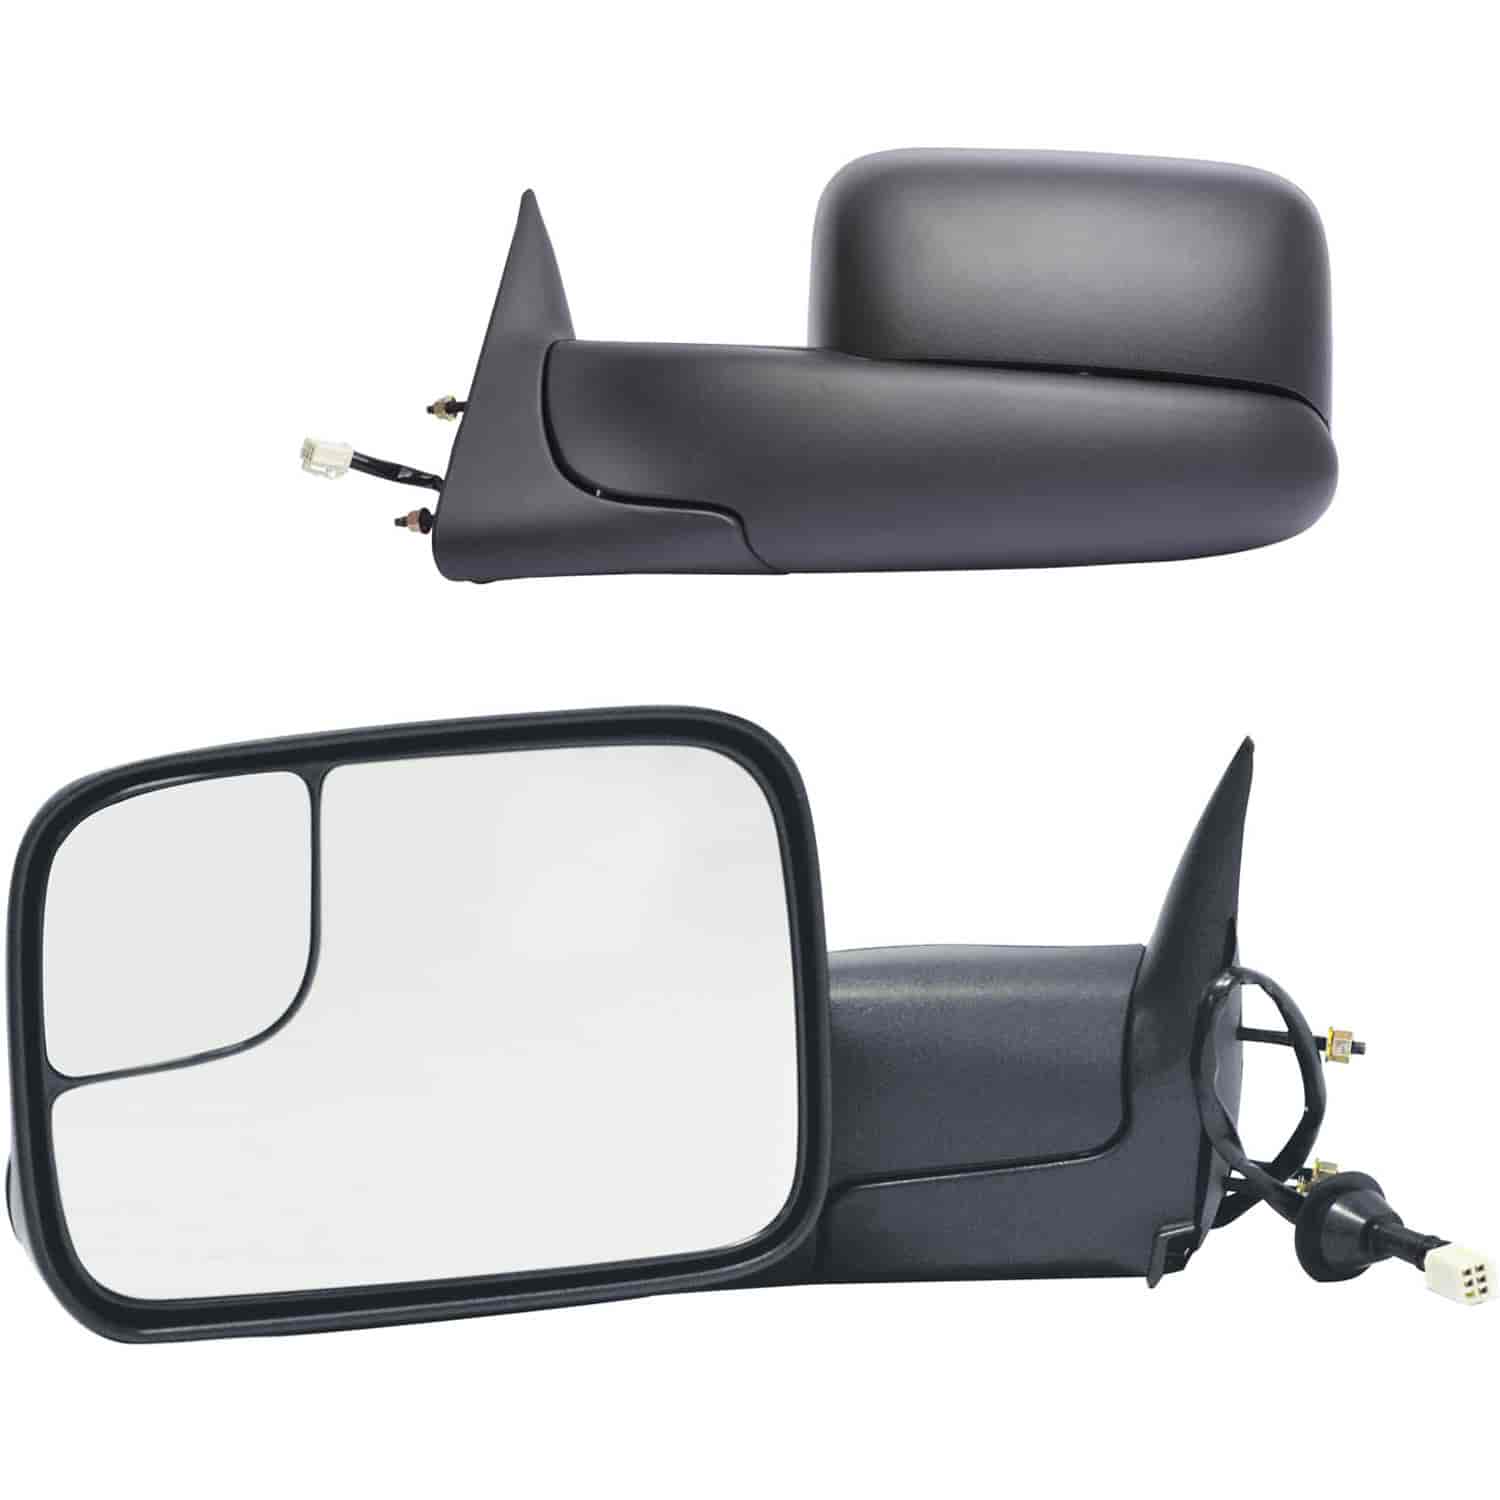 OEM Style Replacement mirror set for 98-01 1500